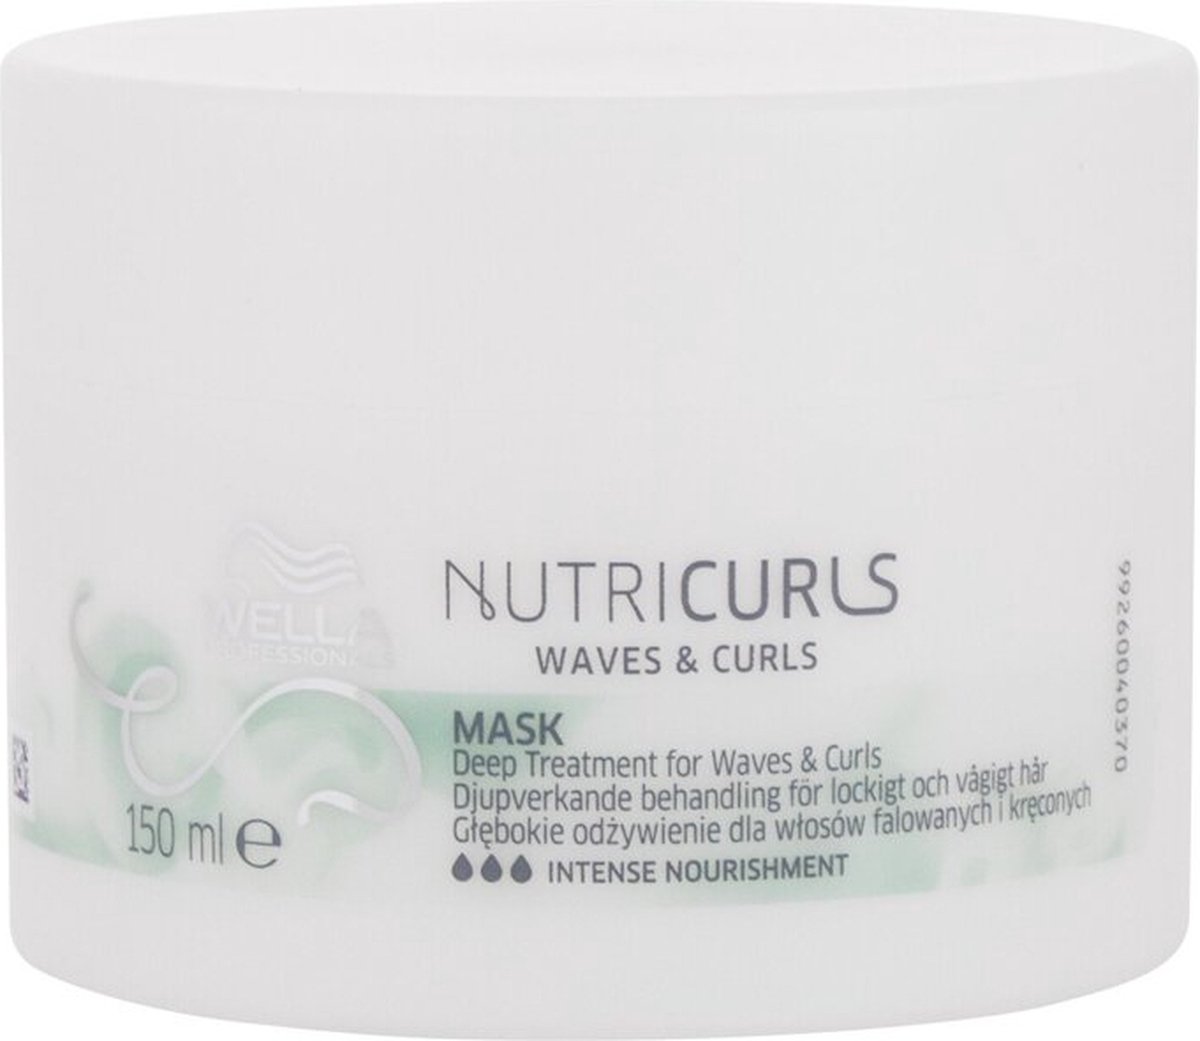 Wella Professional - Nutricurls Waves & Curls Mask - Smoothing Mask For Wavy And Curly Hair